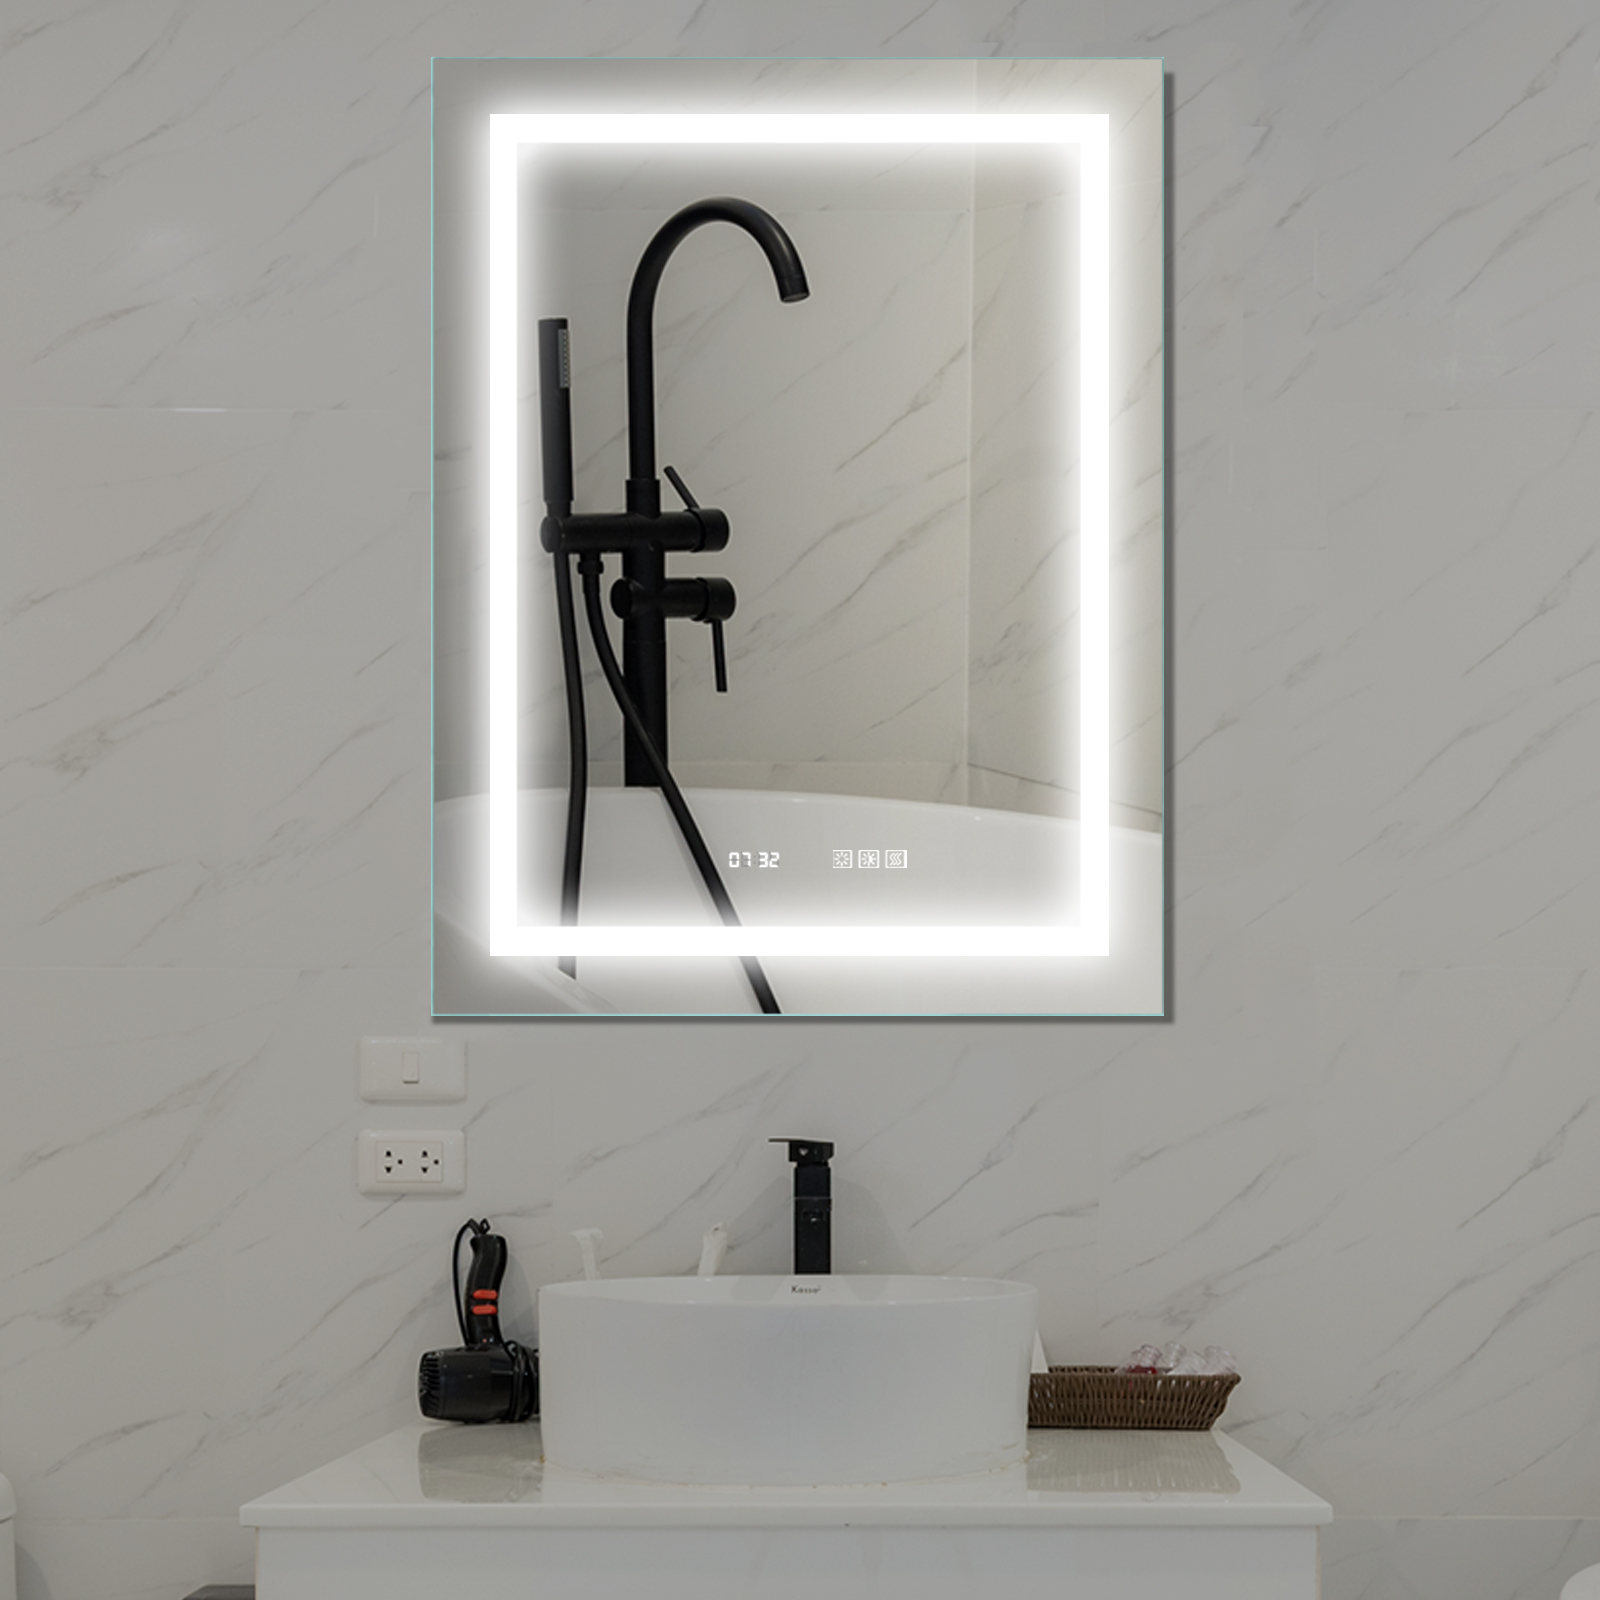 LED Bathroom Vanity Mirror, 36 x 28 inch, Anti Fog, Night Light, Time,Temperature,Dimmable,Color Temper 3000K-6400K,90+ CRI,Vertical Wall Mounted Only-CASAINC